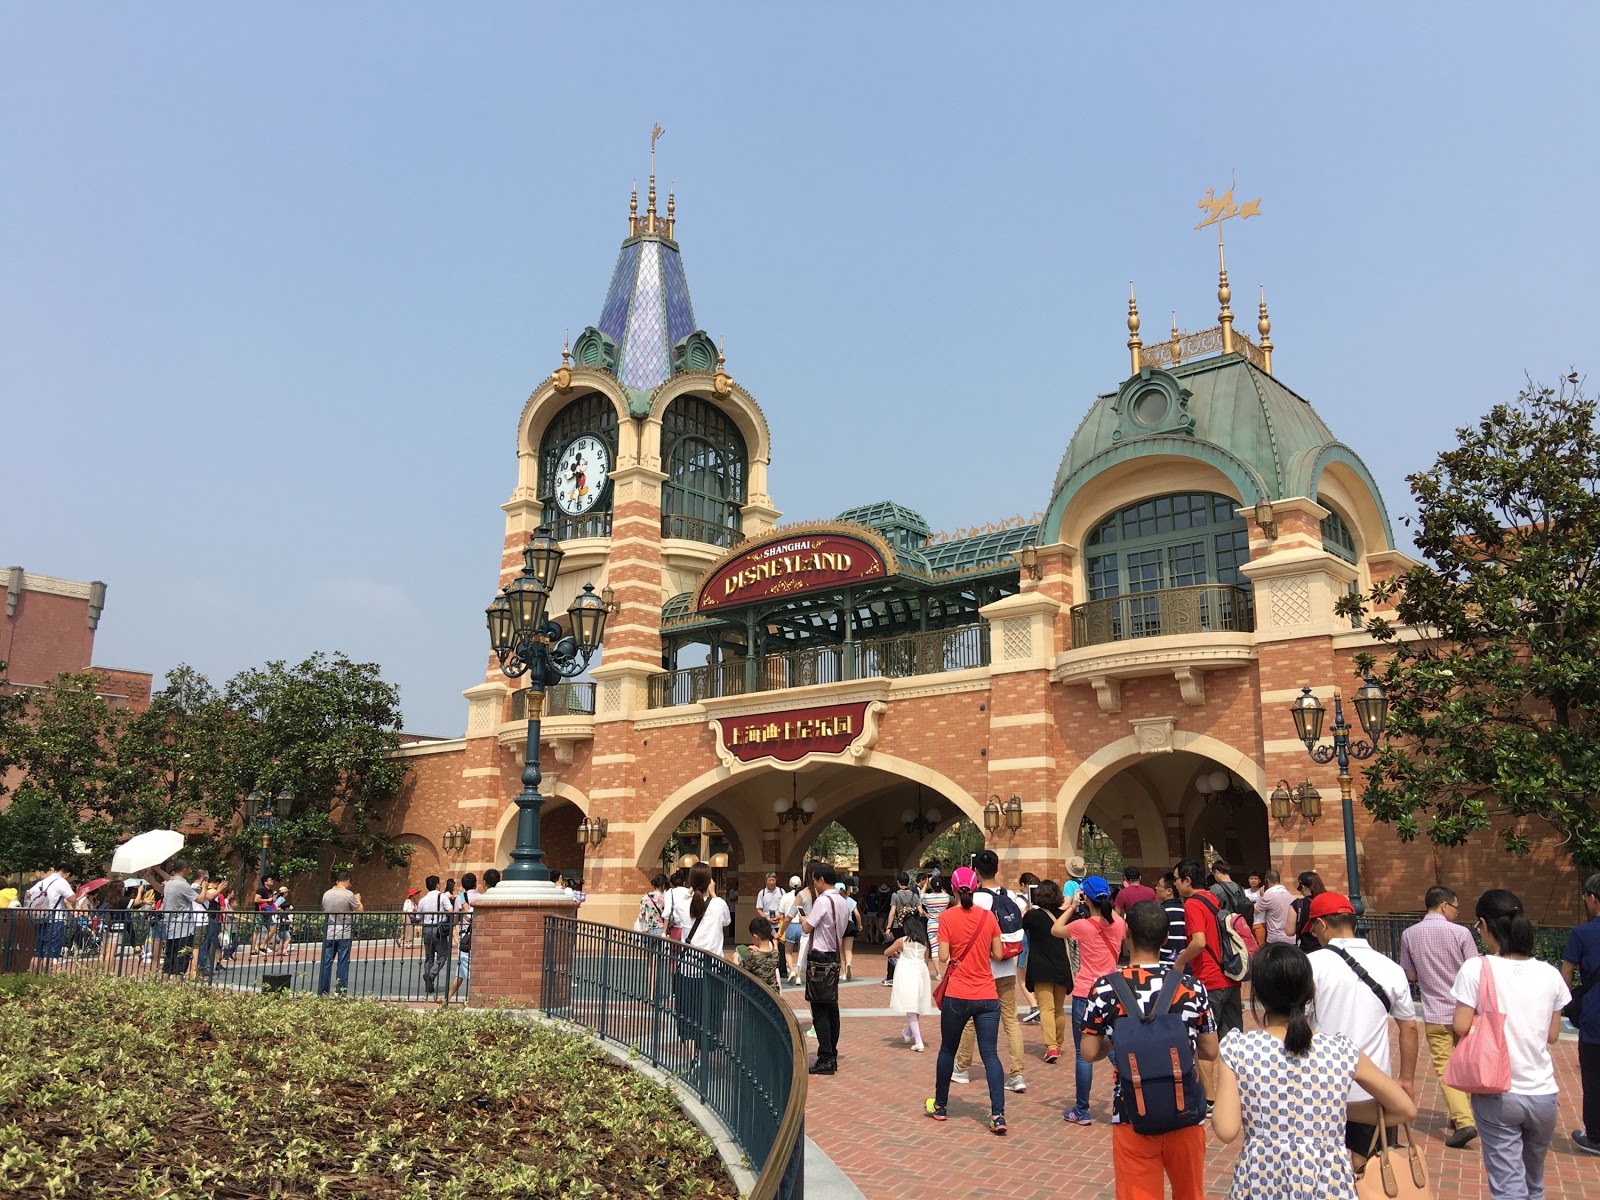 Shanghai Disneyland will be featured in "To Infinity and Beyond" Photo by Jeremiah Good